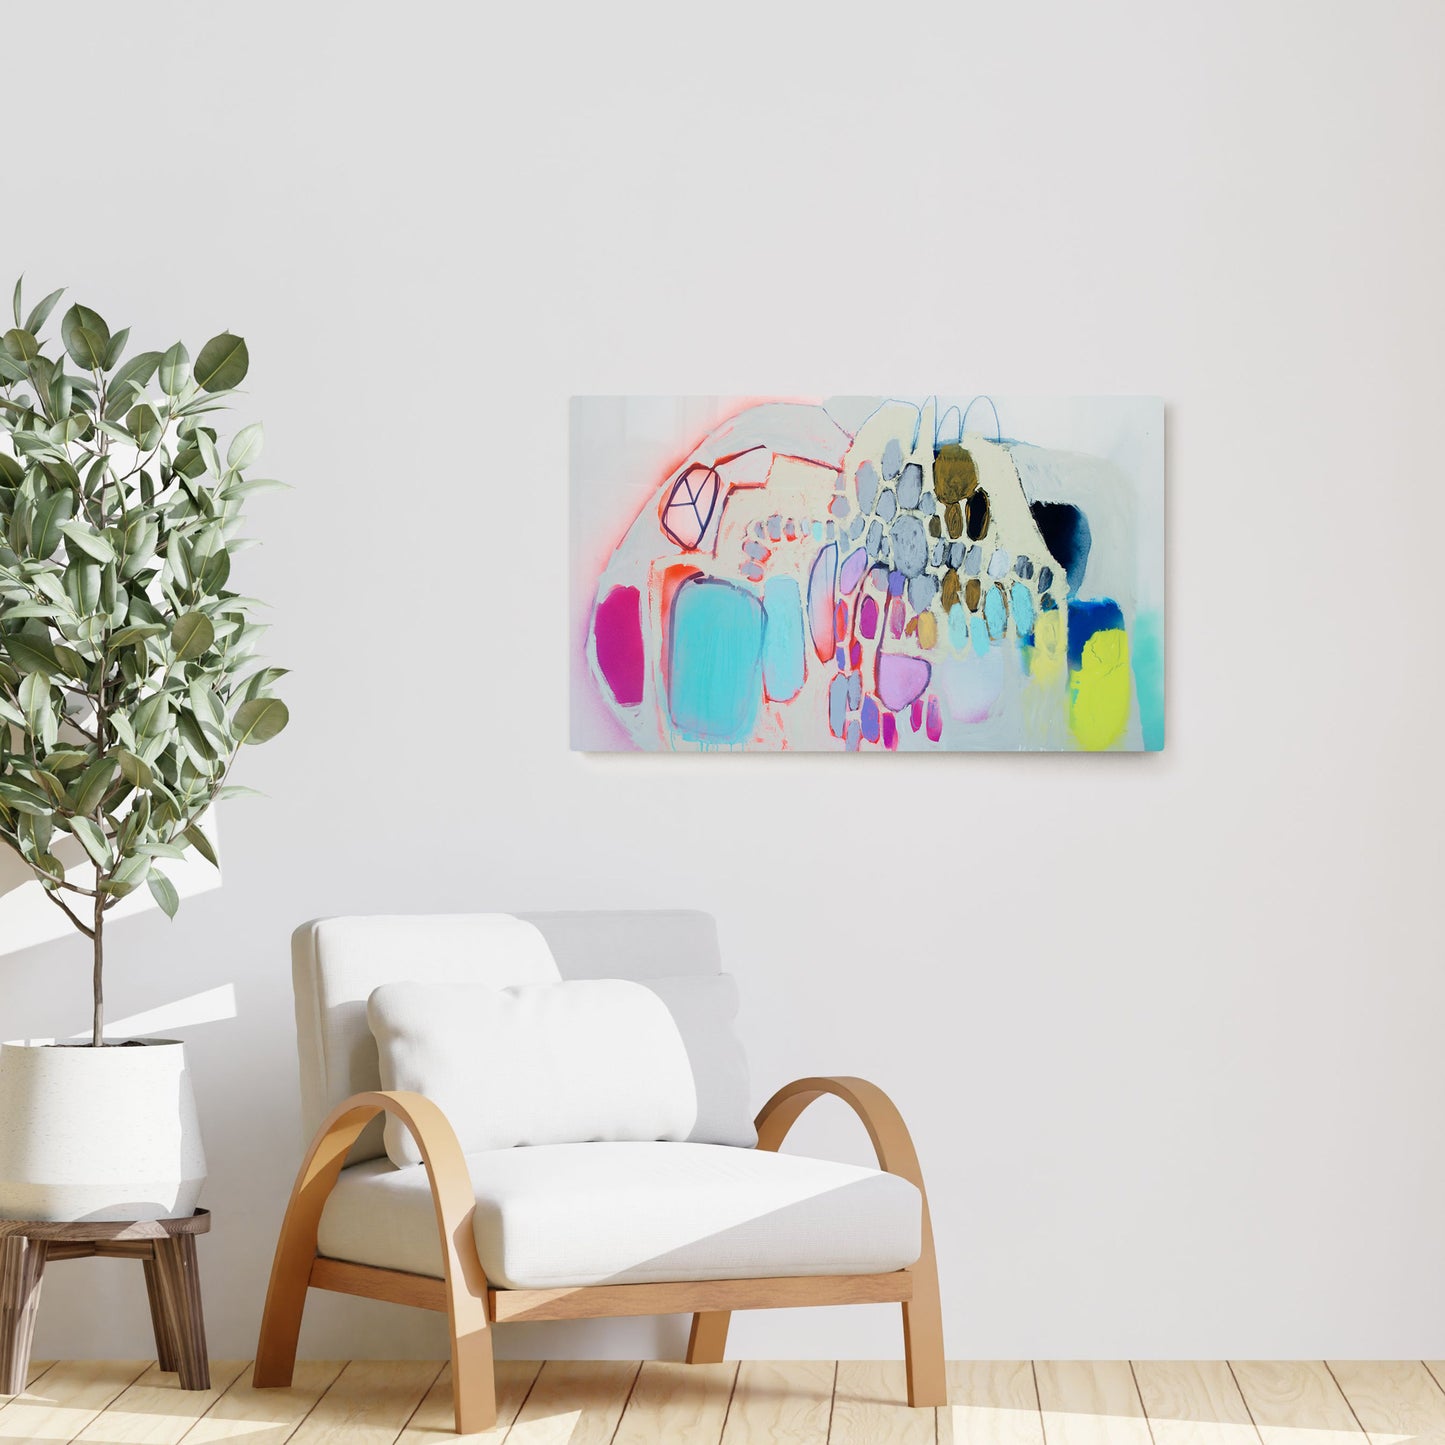 Claire Desjardins' Something I Am painting reproduced on HD metal print and displayed on wall